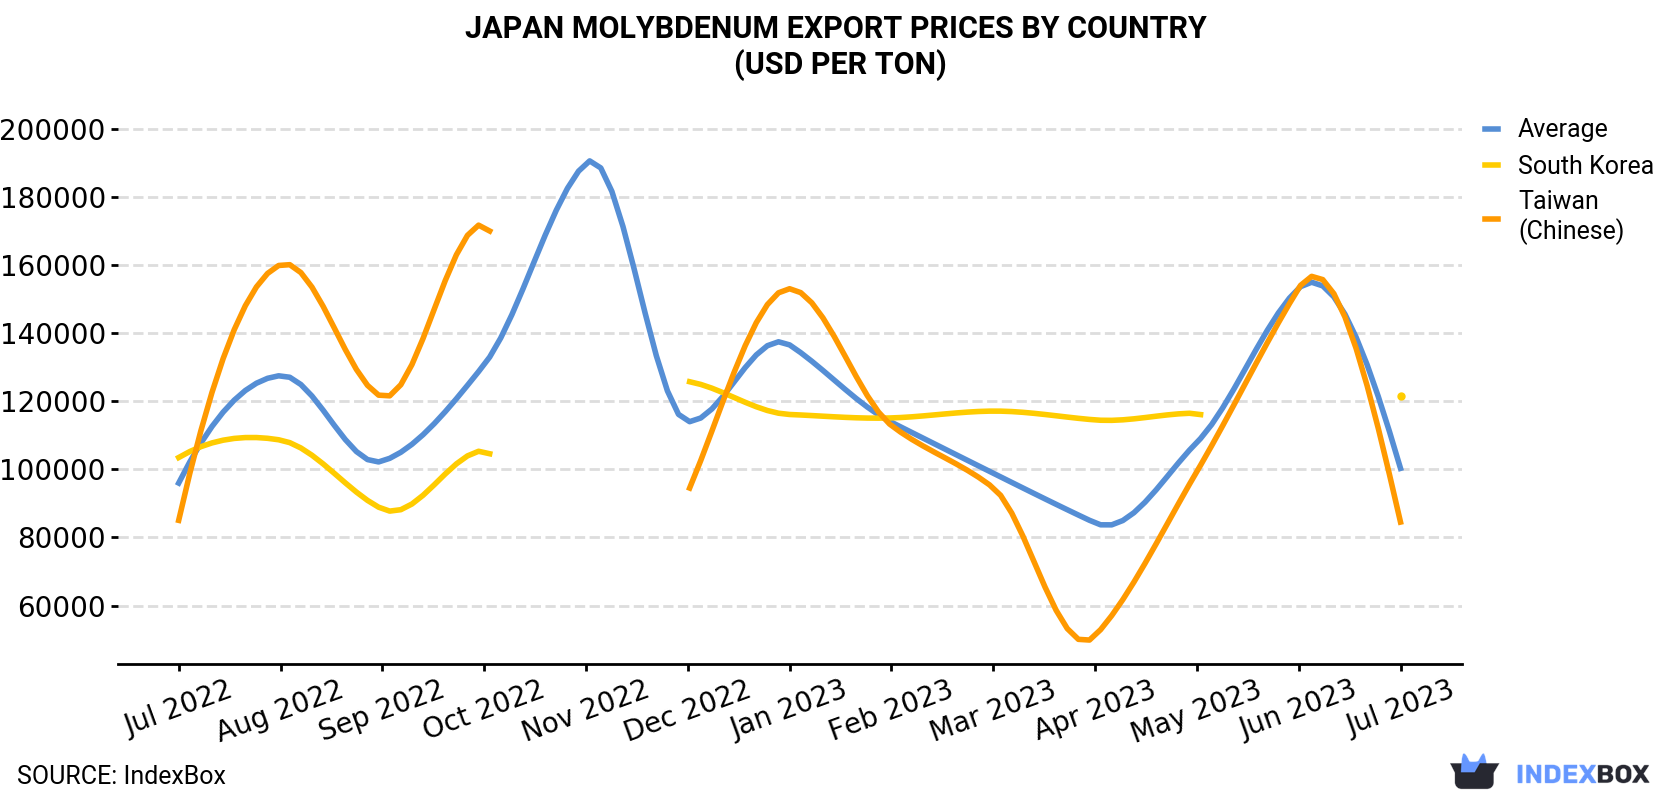 Japan Molybdenum Export Prices By Country (USD Per Ton)